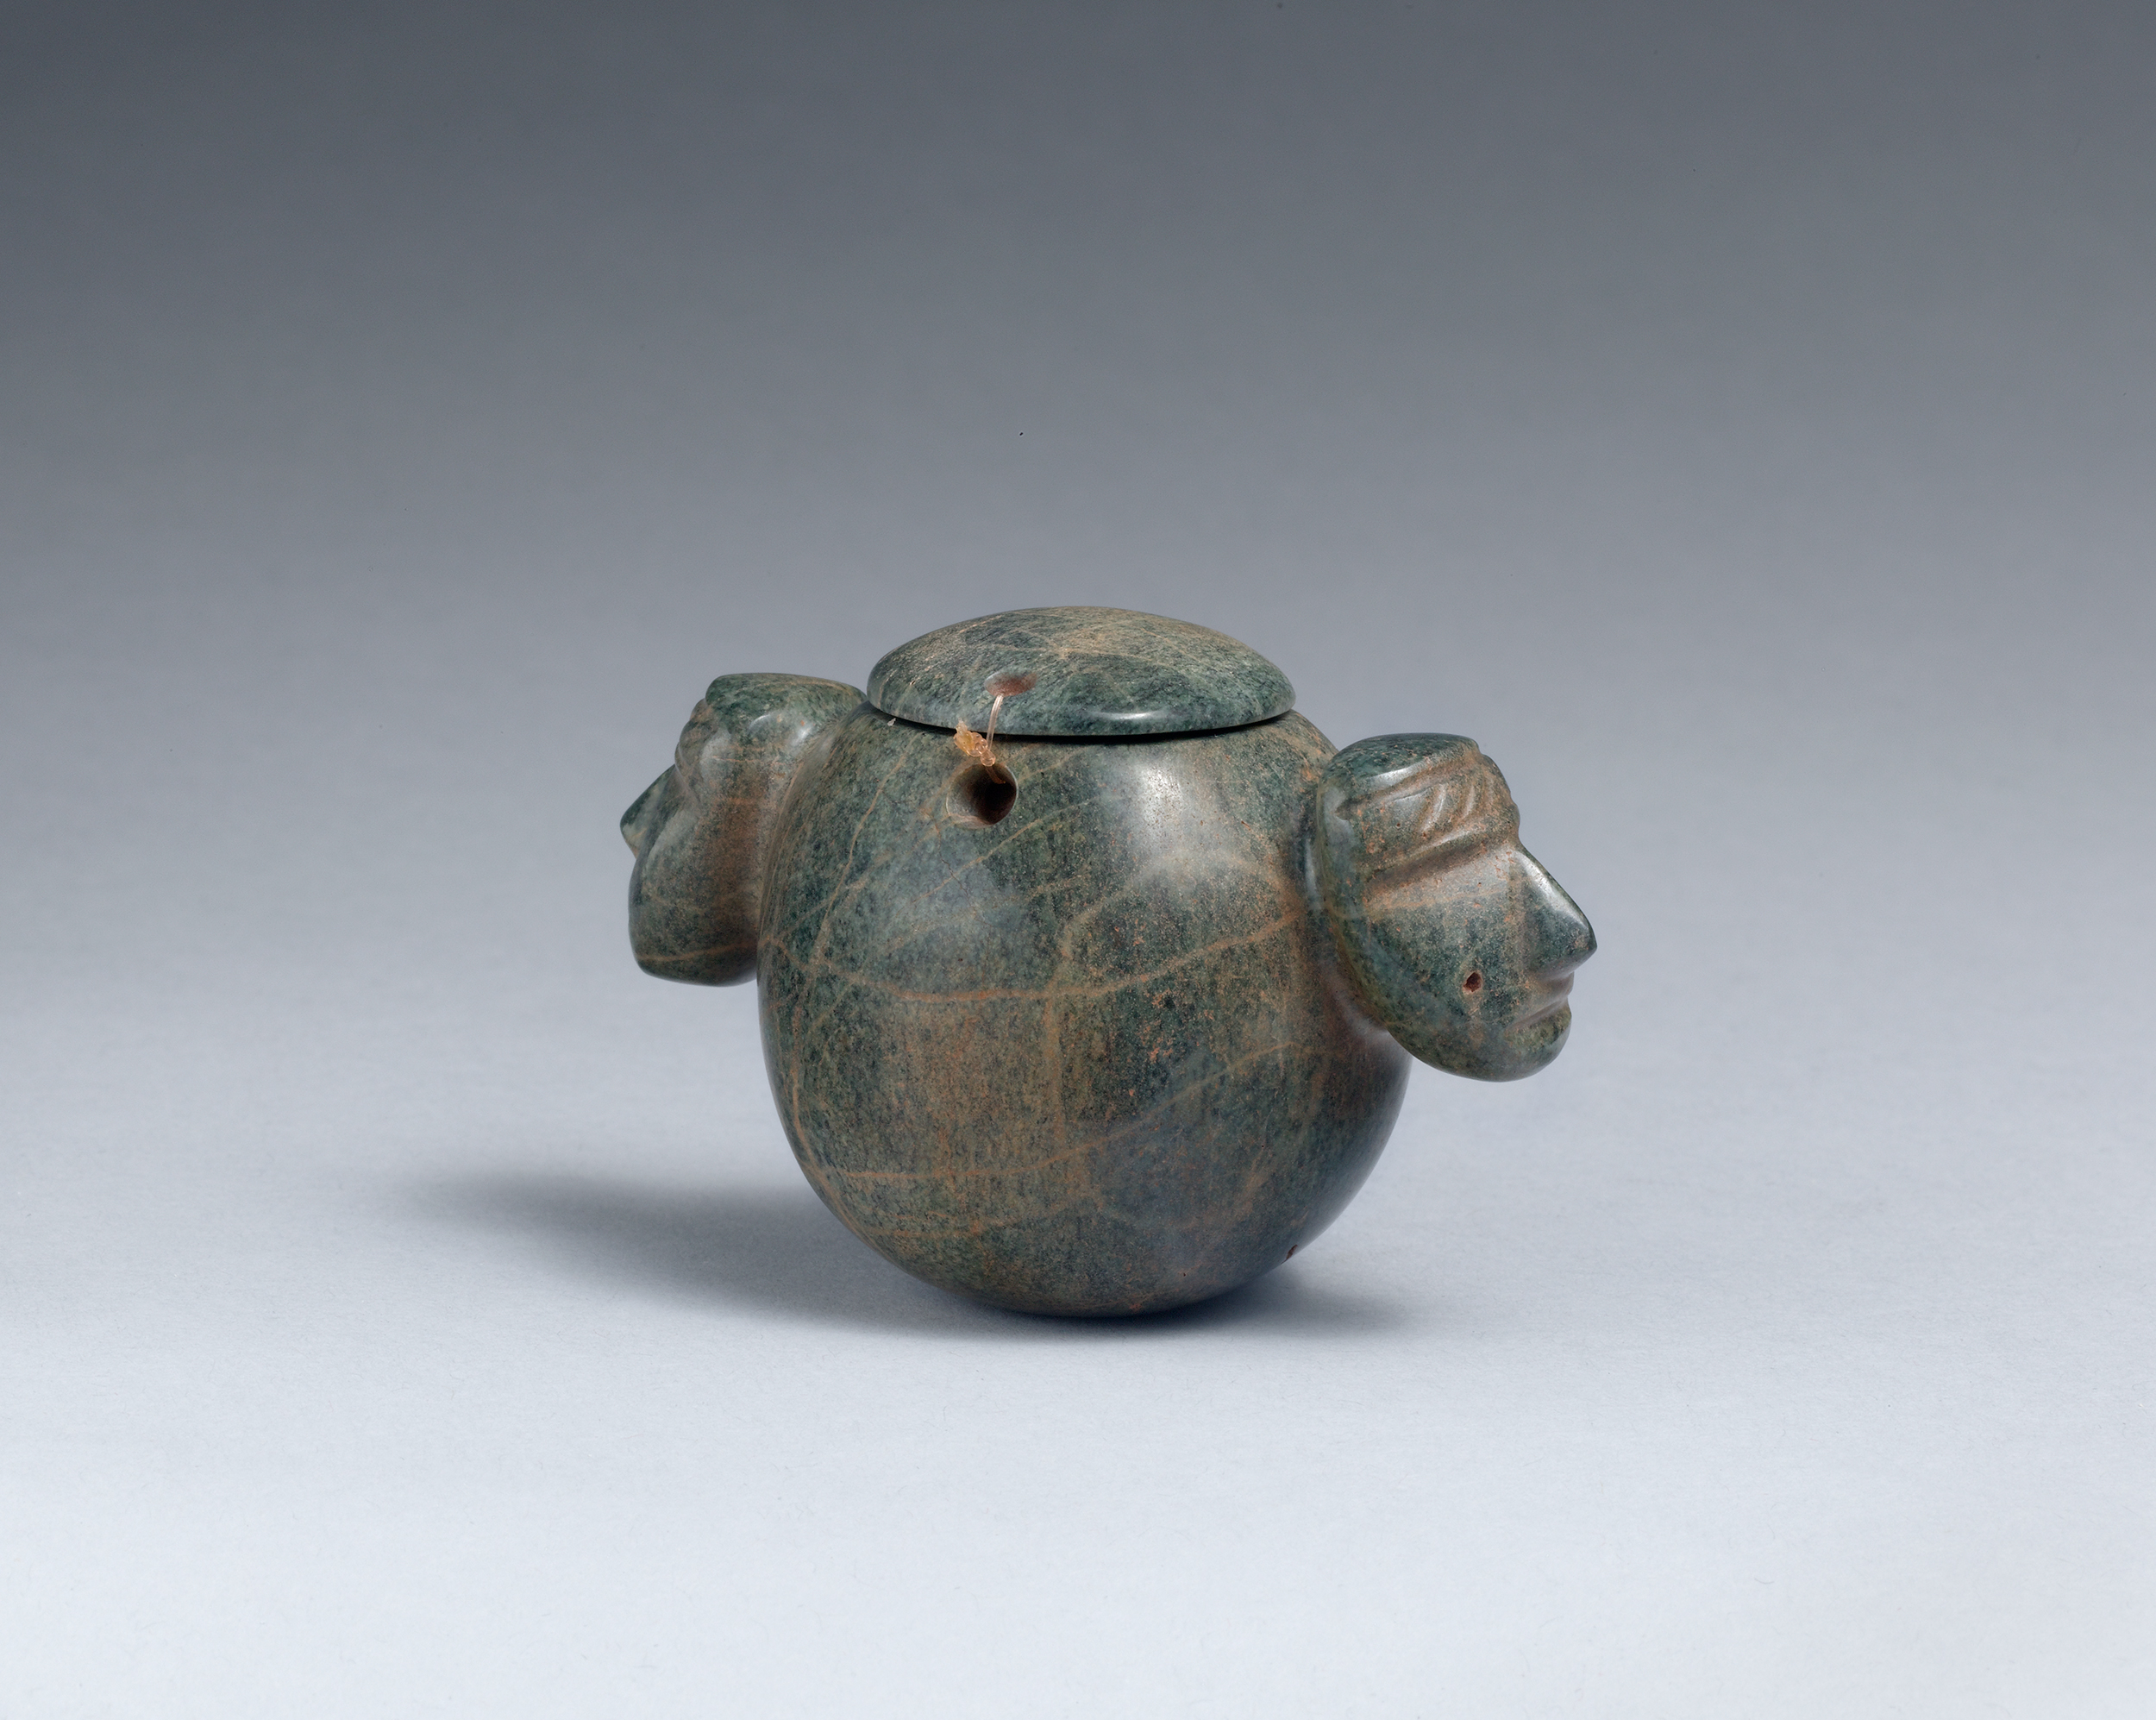 Vessel with stylized relief of two identical human heads on either side.